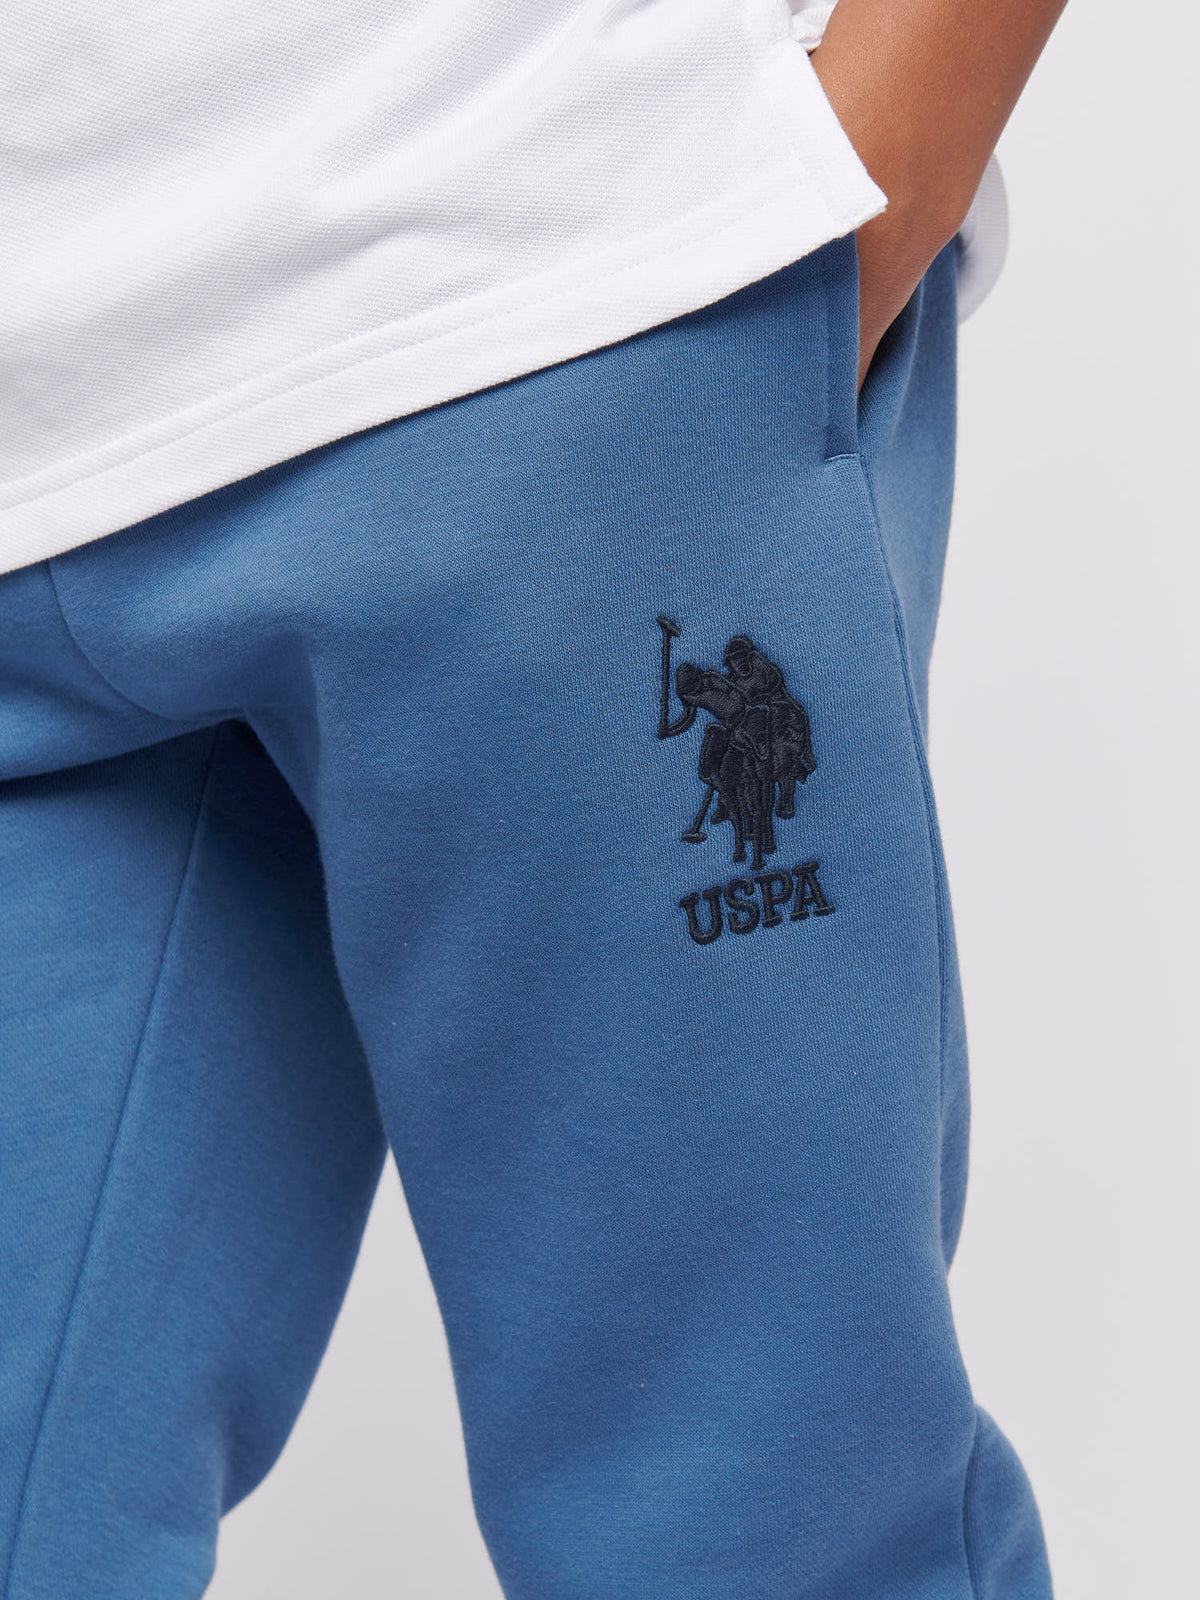 Boys Player 3 Joggers in Blue Horizon